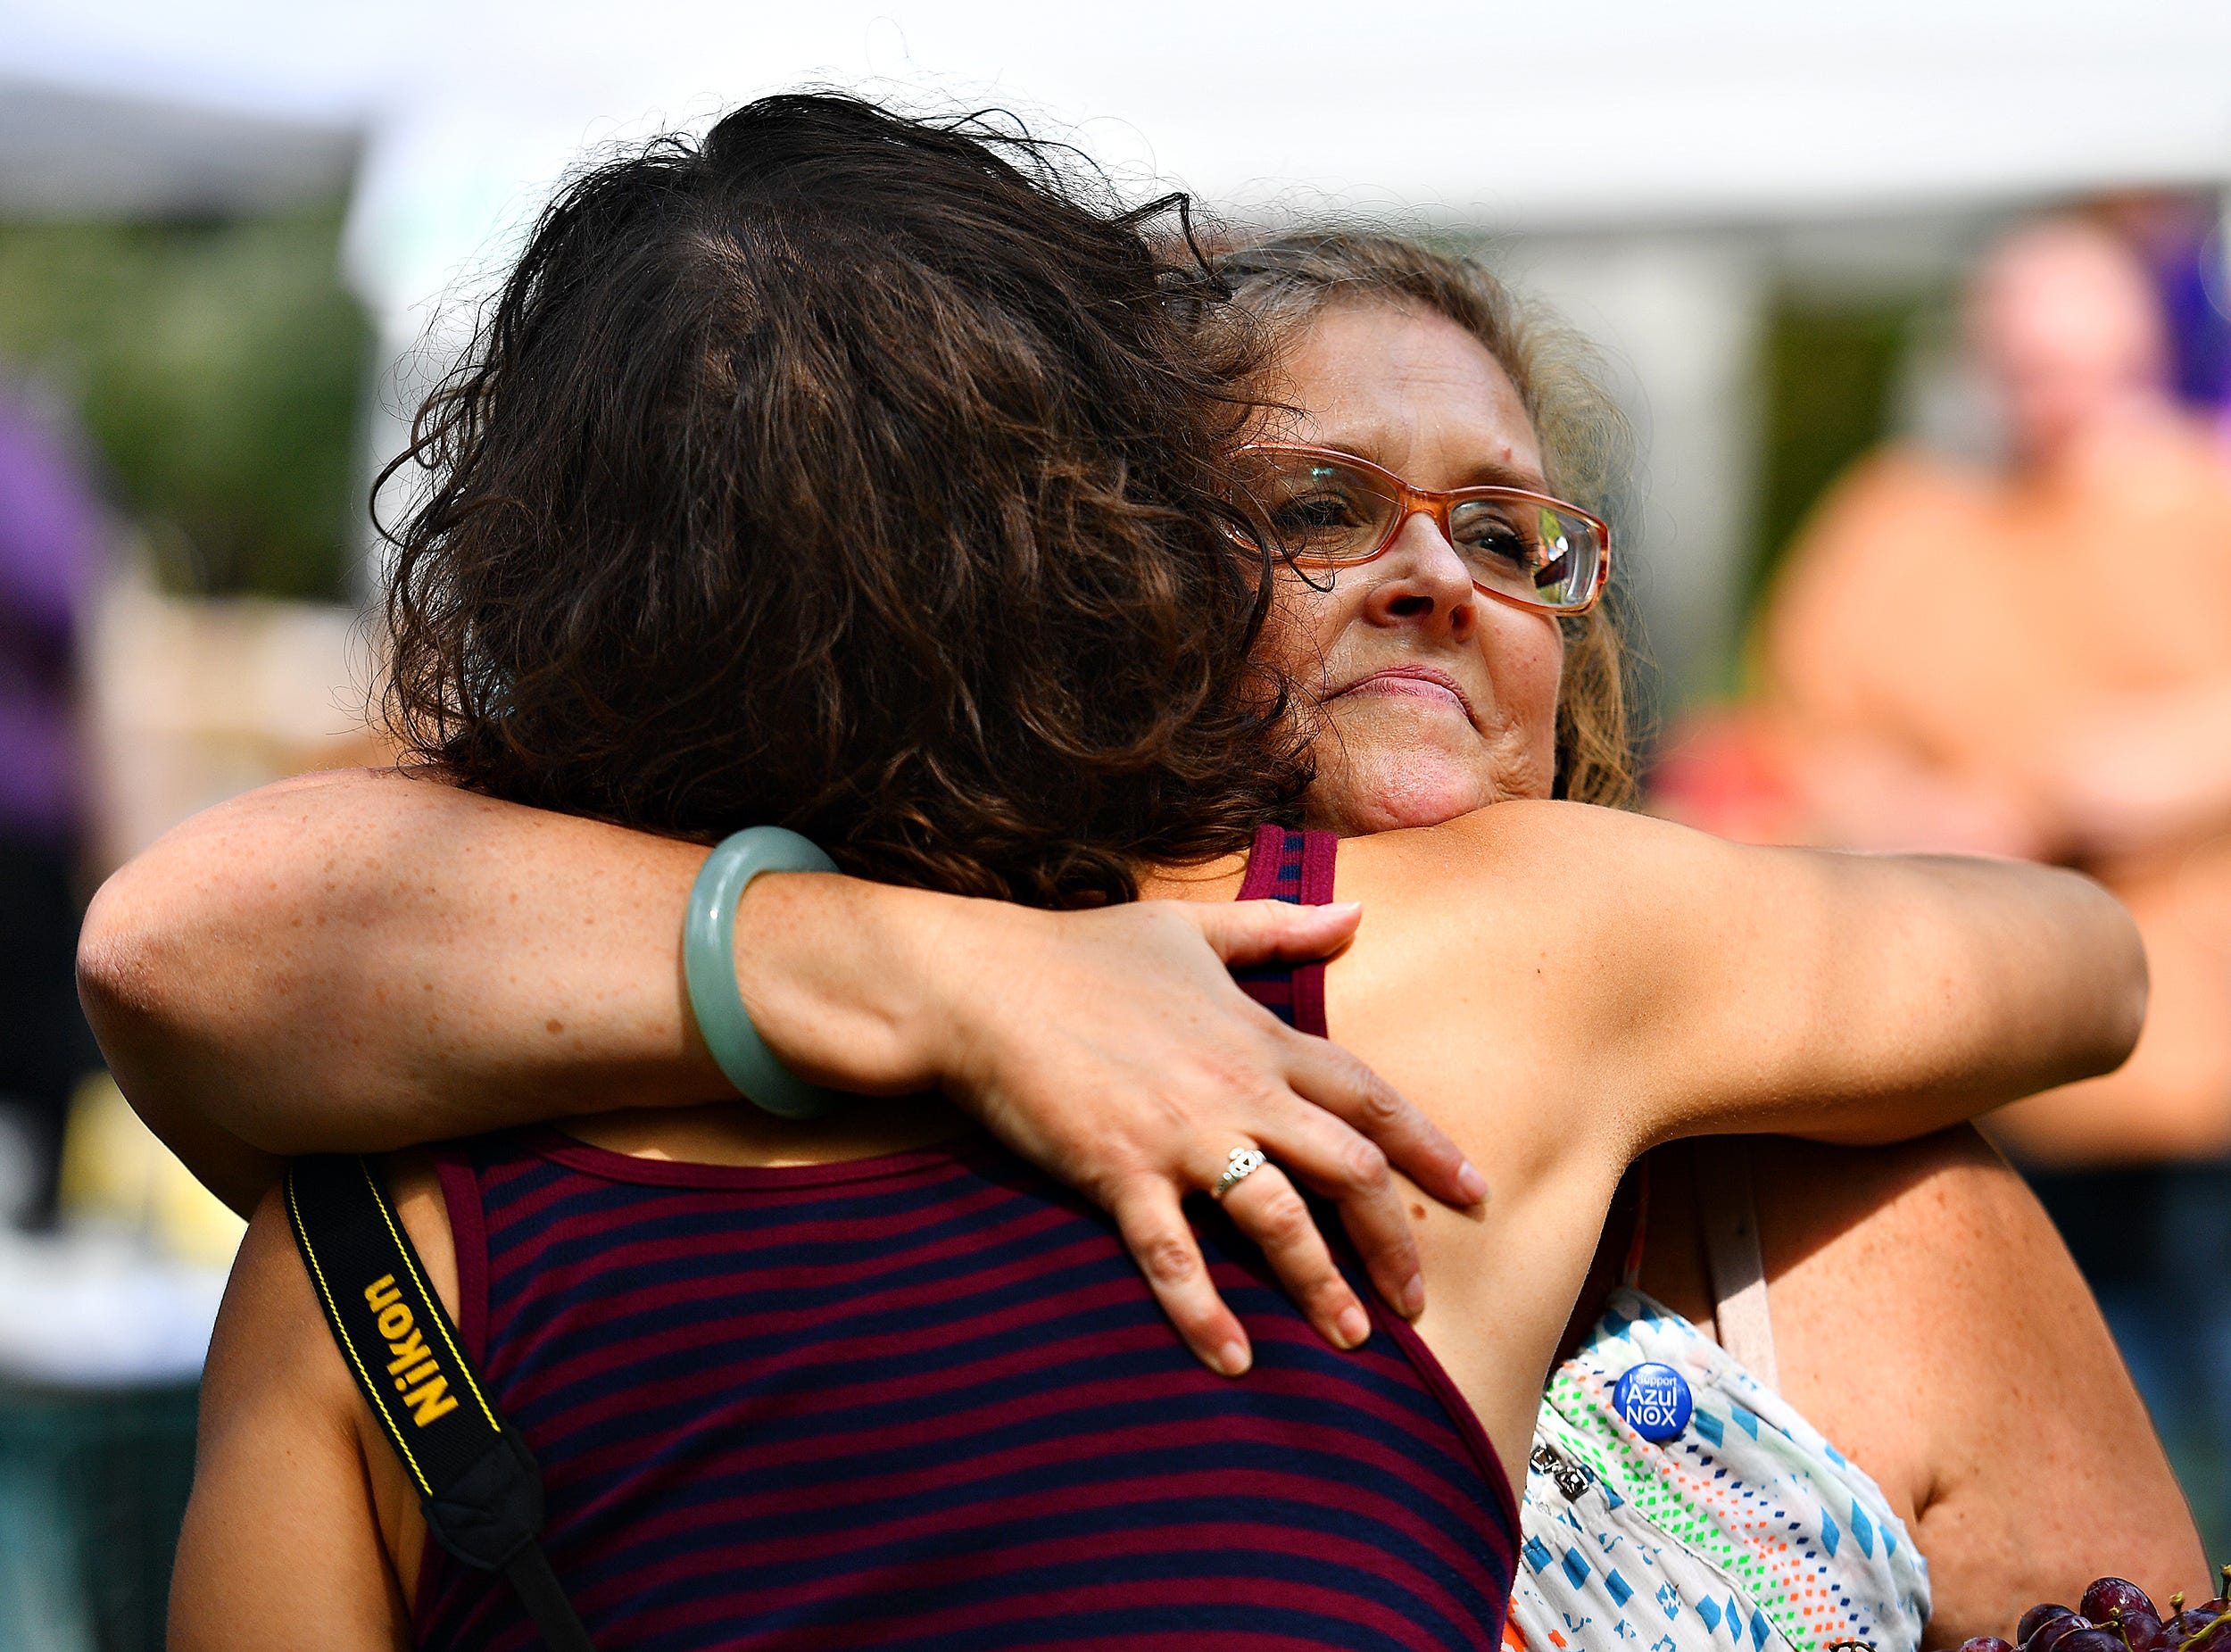 Rev. Shawnee Frasca, of Hellam Township, hugs participant Melanie Gorguny as a harvest ritual is performed as the main ritual of the day, to honor both the harvest time of year and to cultivate community, during the 8th annual Pagan Pride Festival at Samuel S. Lewis State Park in Lower Windsor Township, Saturday, Sept. 28, 2019. Dawn J. Sagert photo